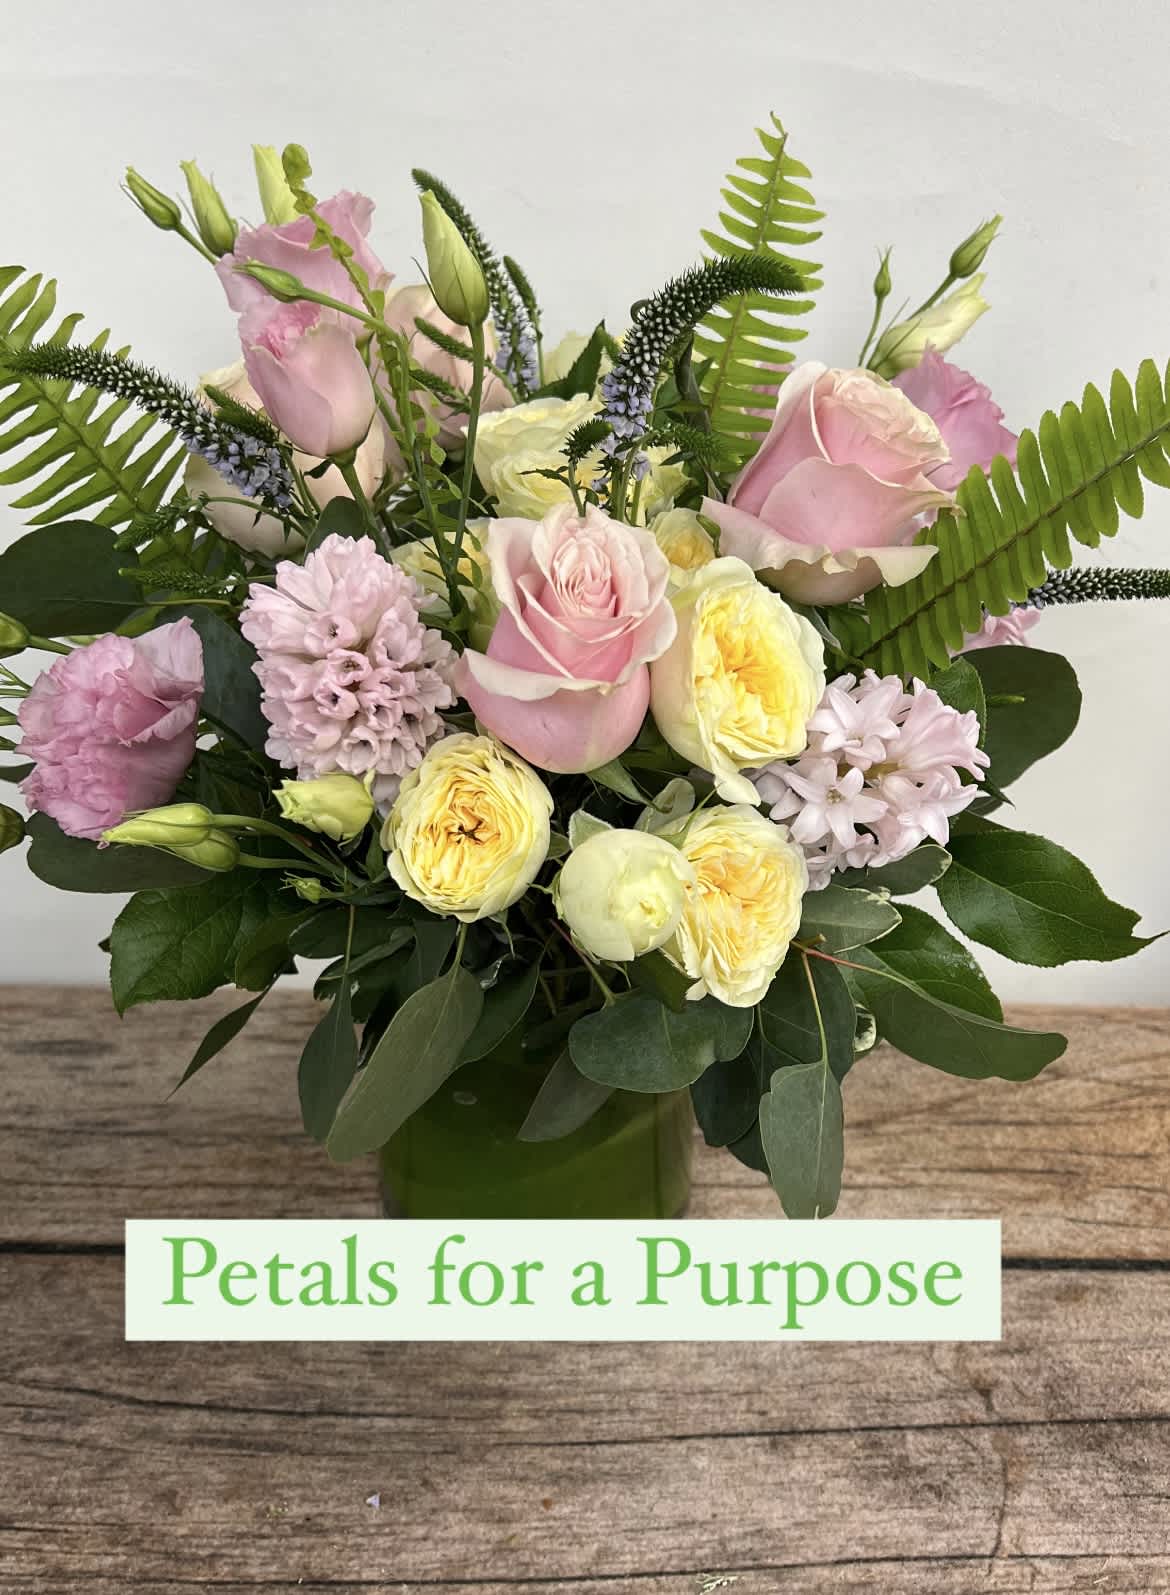 Petals for a Purpose - &quot;Hey Jude&quot; - April and May- St. Jude Children's Hospital. Each month, one of our designers chooses a charity near and dear to them. Proceeds from the sale of this arrangement will go towards this cause.  Patty created this pastel-toned arrangement of spring blooms to help support children and their families during their trying times. 